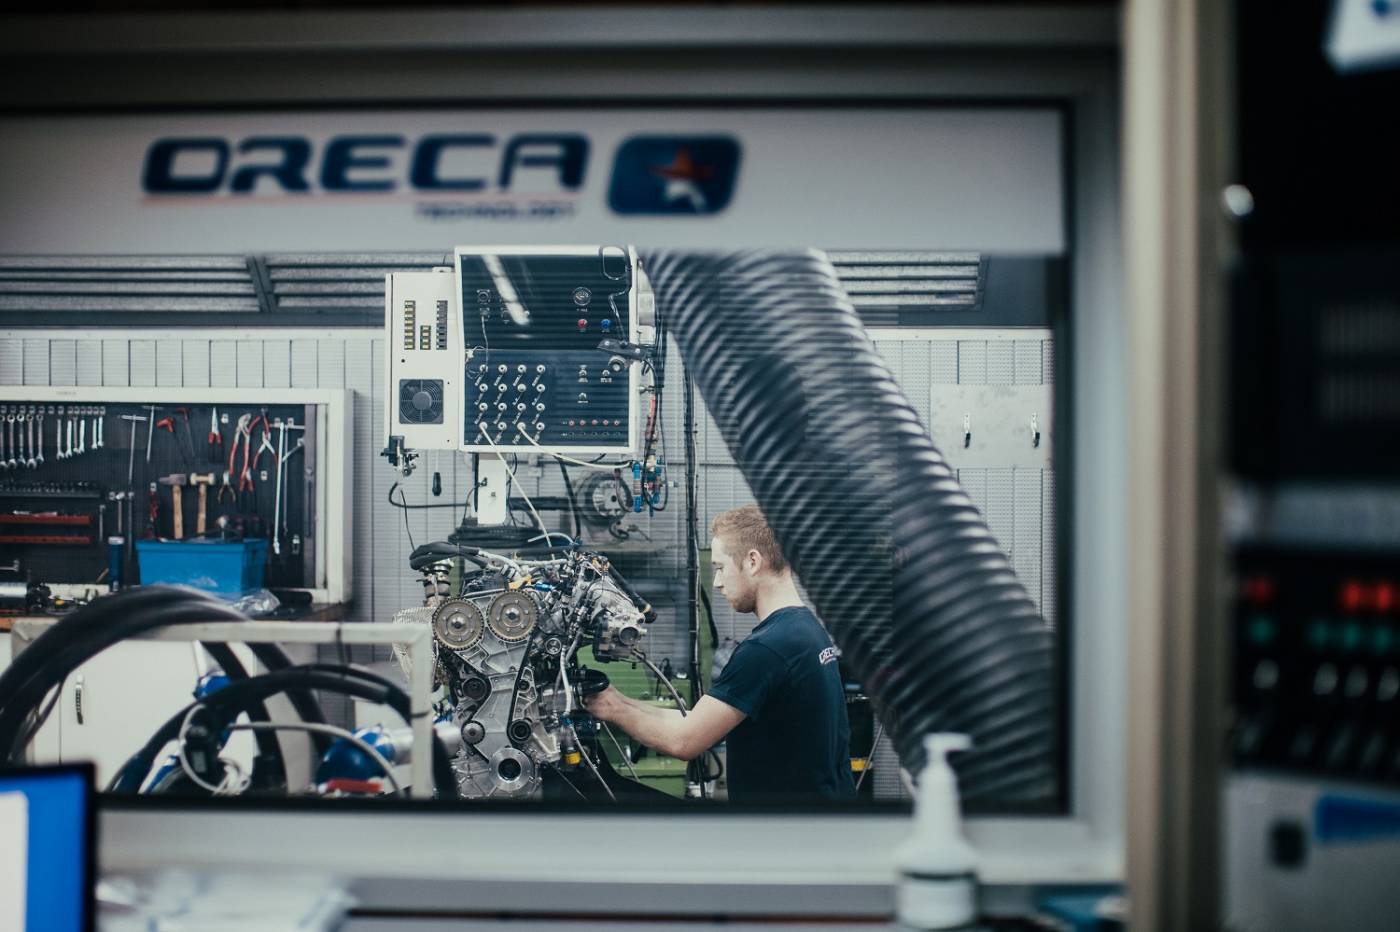 A new ambitious project for the ORECA group: hydrogen combustion engines